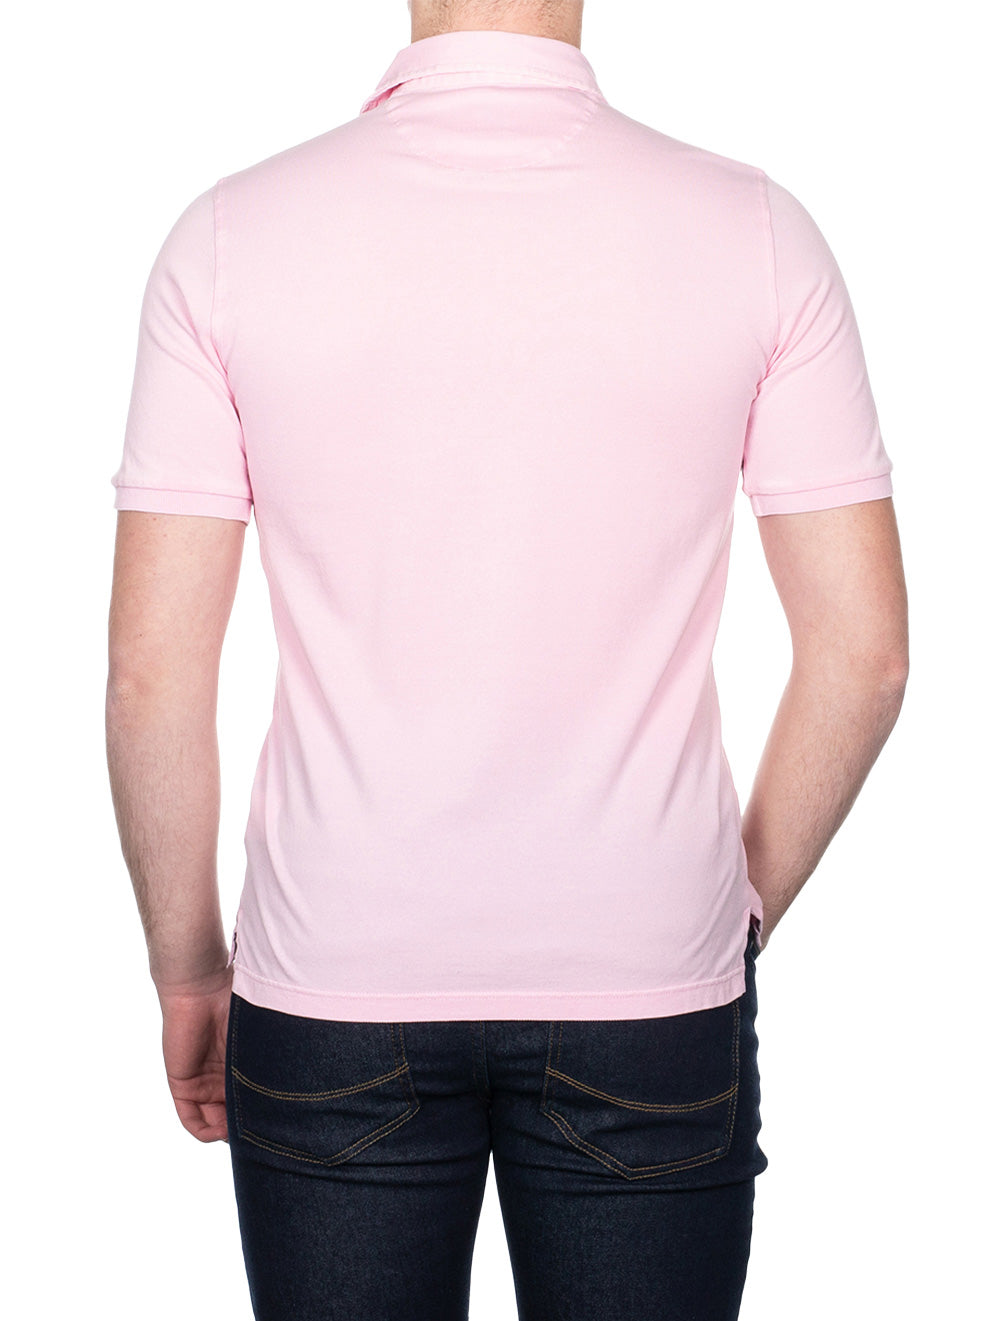 North Piquet Short Sleeve Polo Pink